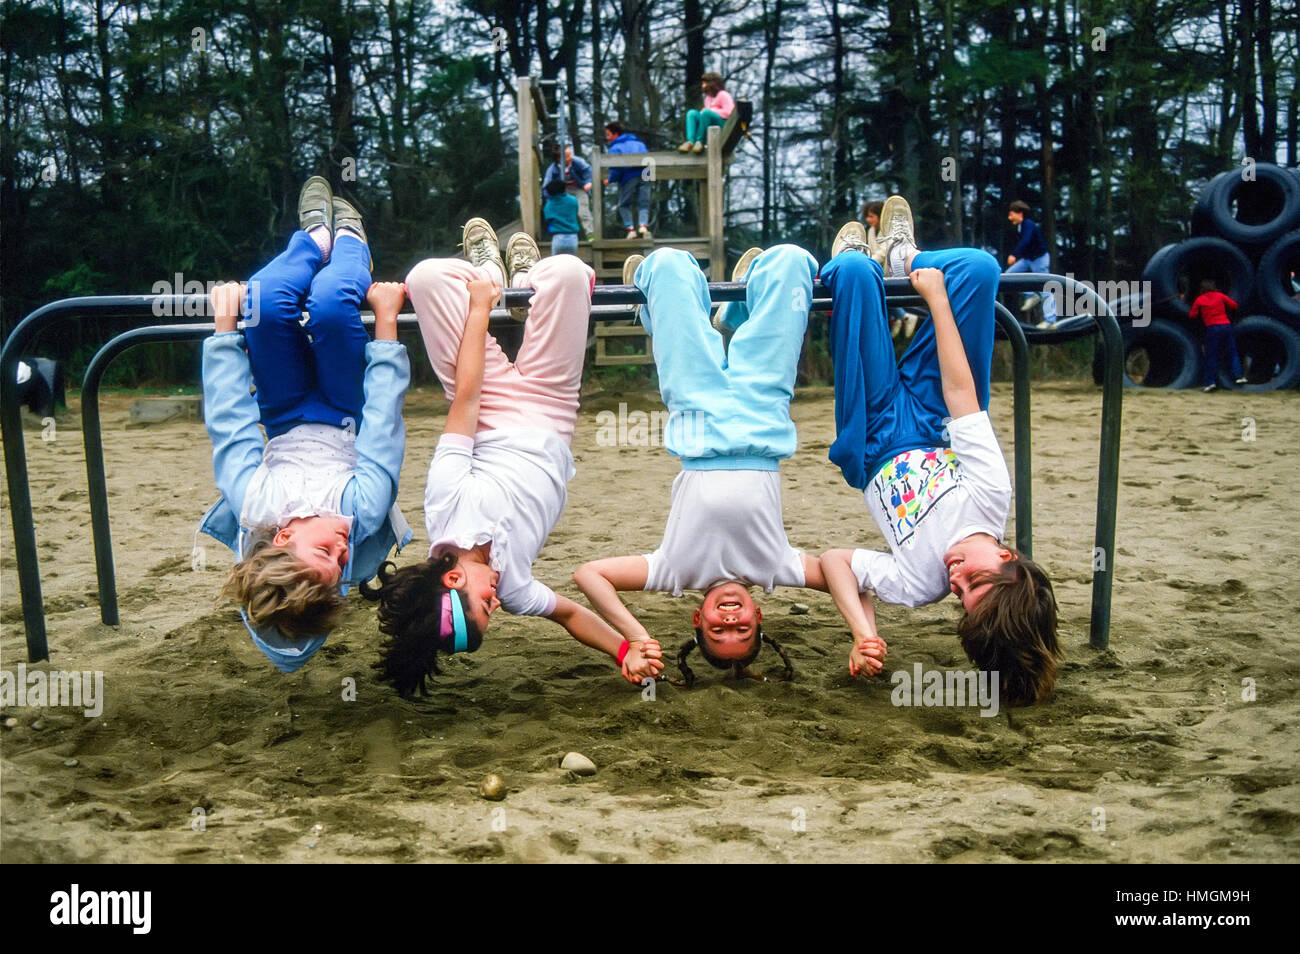 Four happy girl children hanging upside down in a school playground. Stock Photo